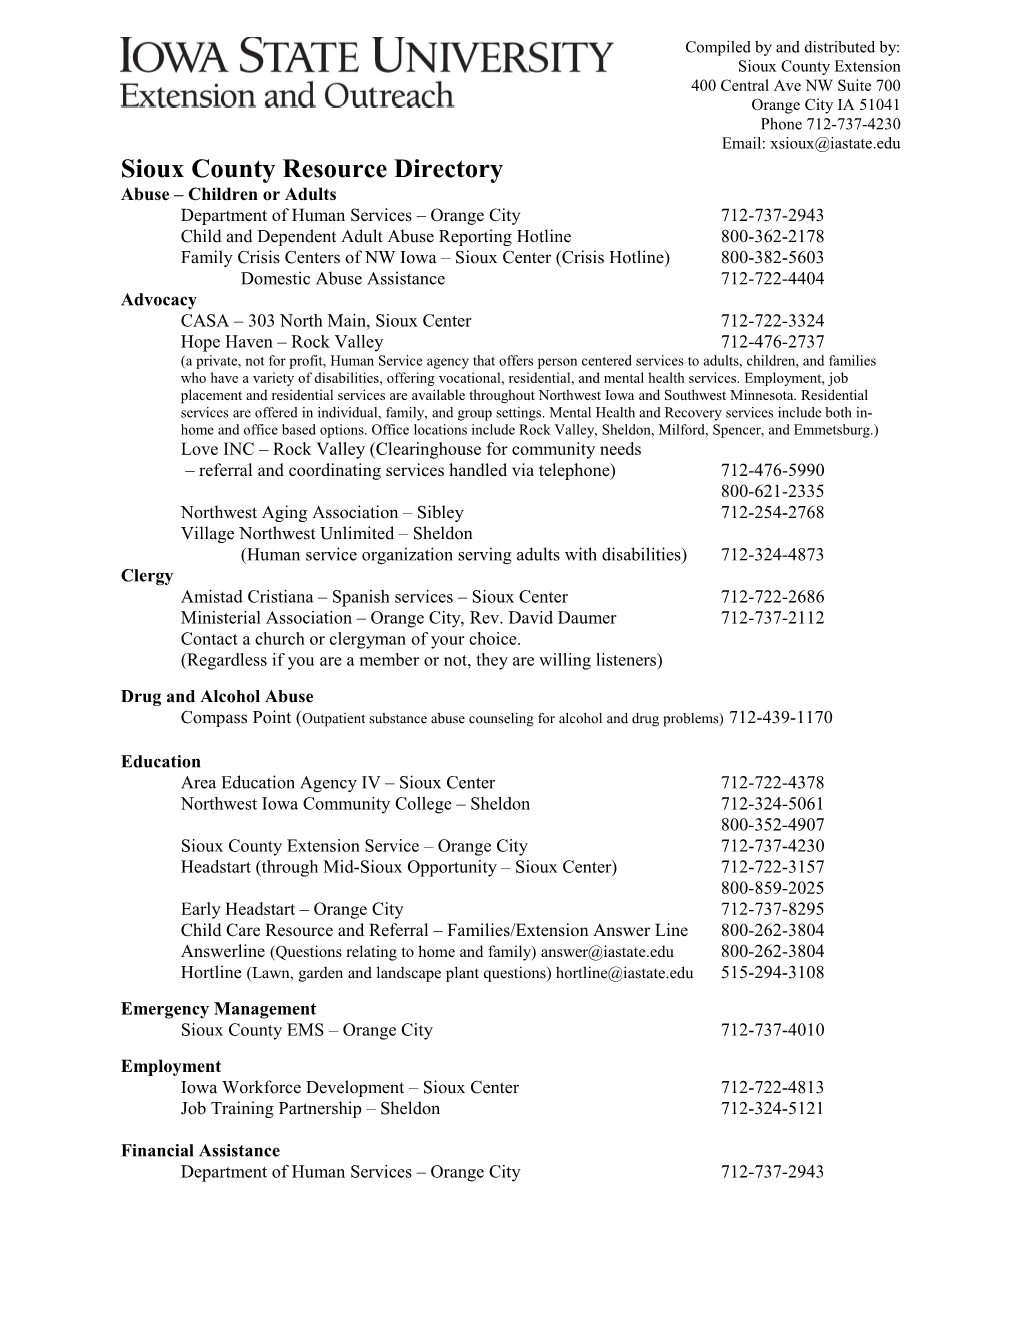 Sioux County Resource Directory Compiled by and Distributed By